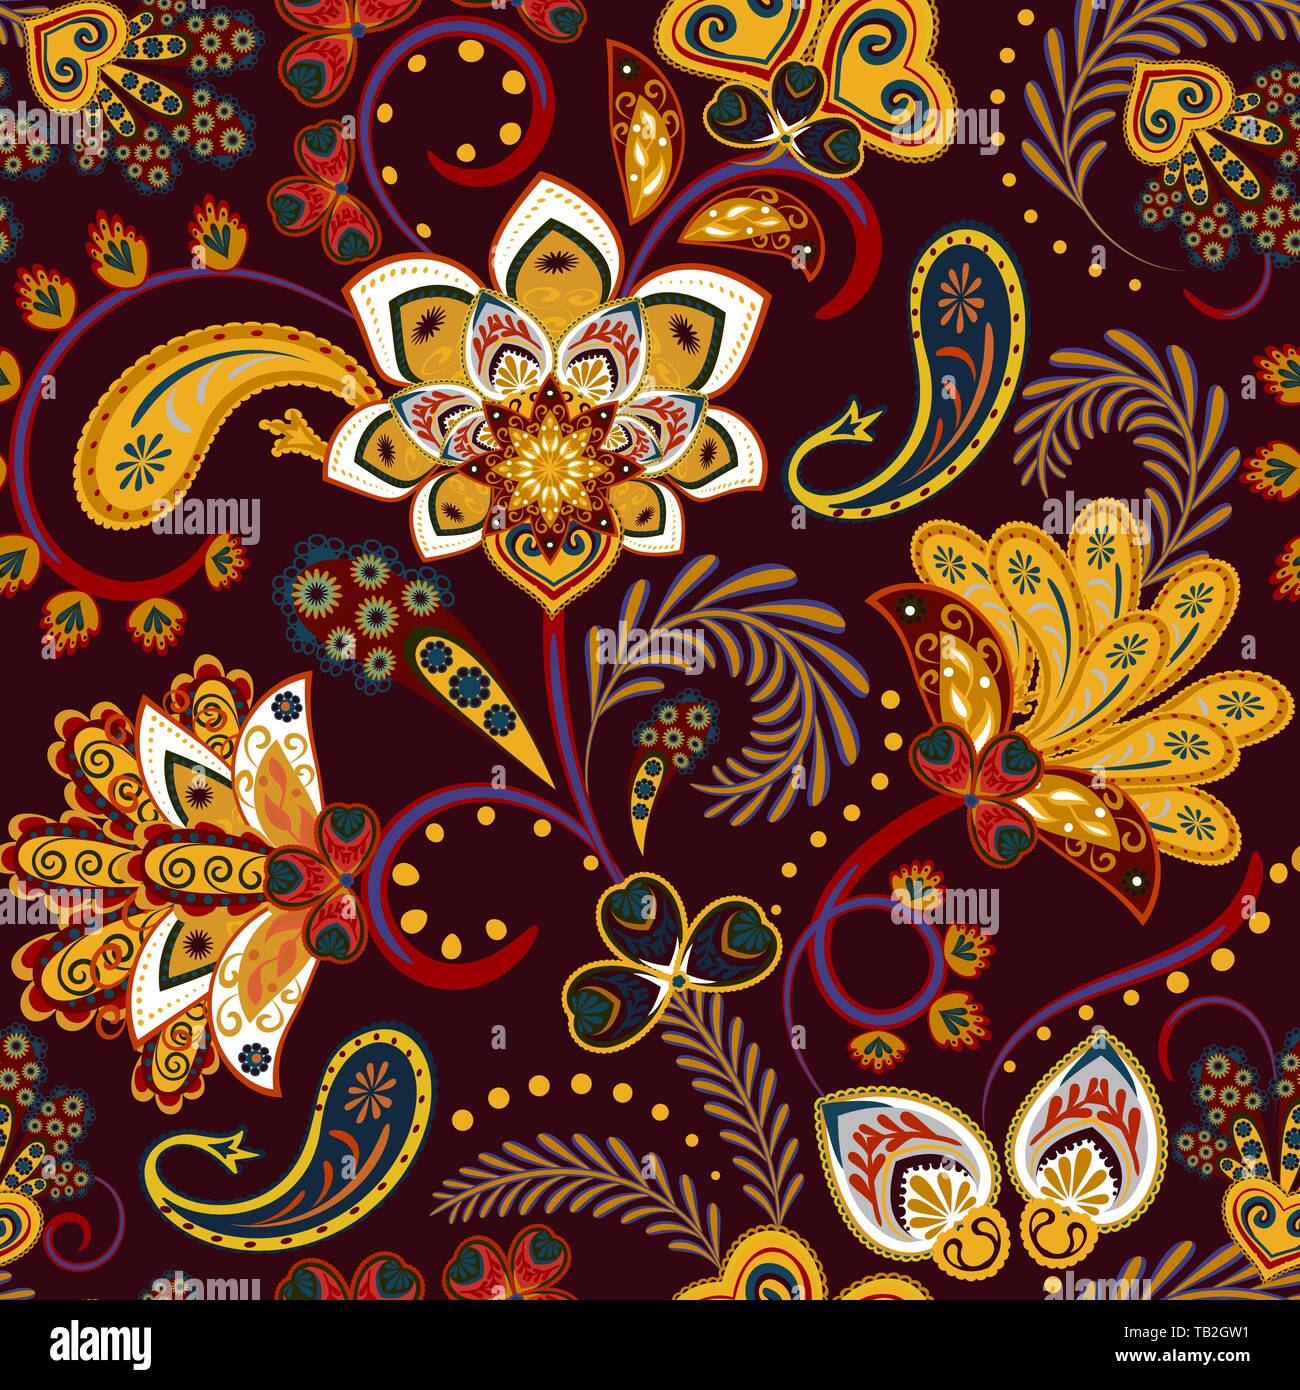 Seamless pattern with fantasy flowers, natural wallpaper, floral decoration curl illustration. Paisley print hand drawn elements. Home decor. Stock Vector